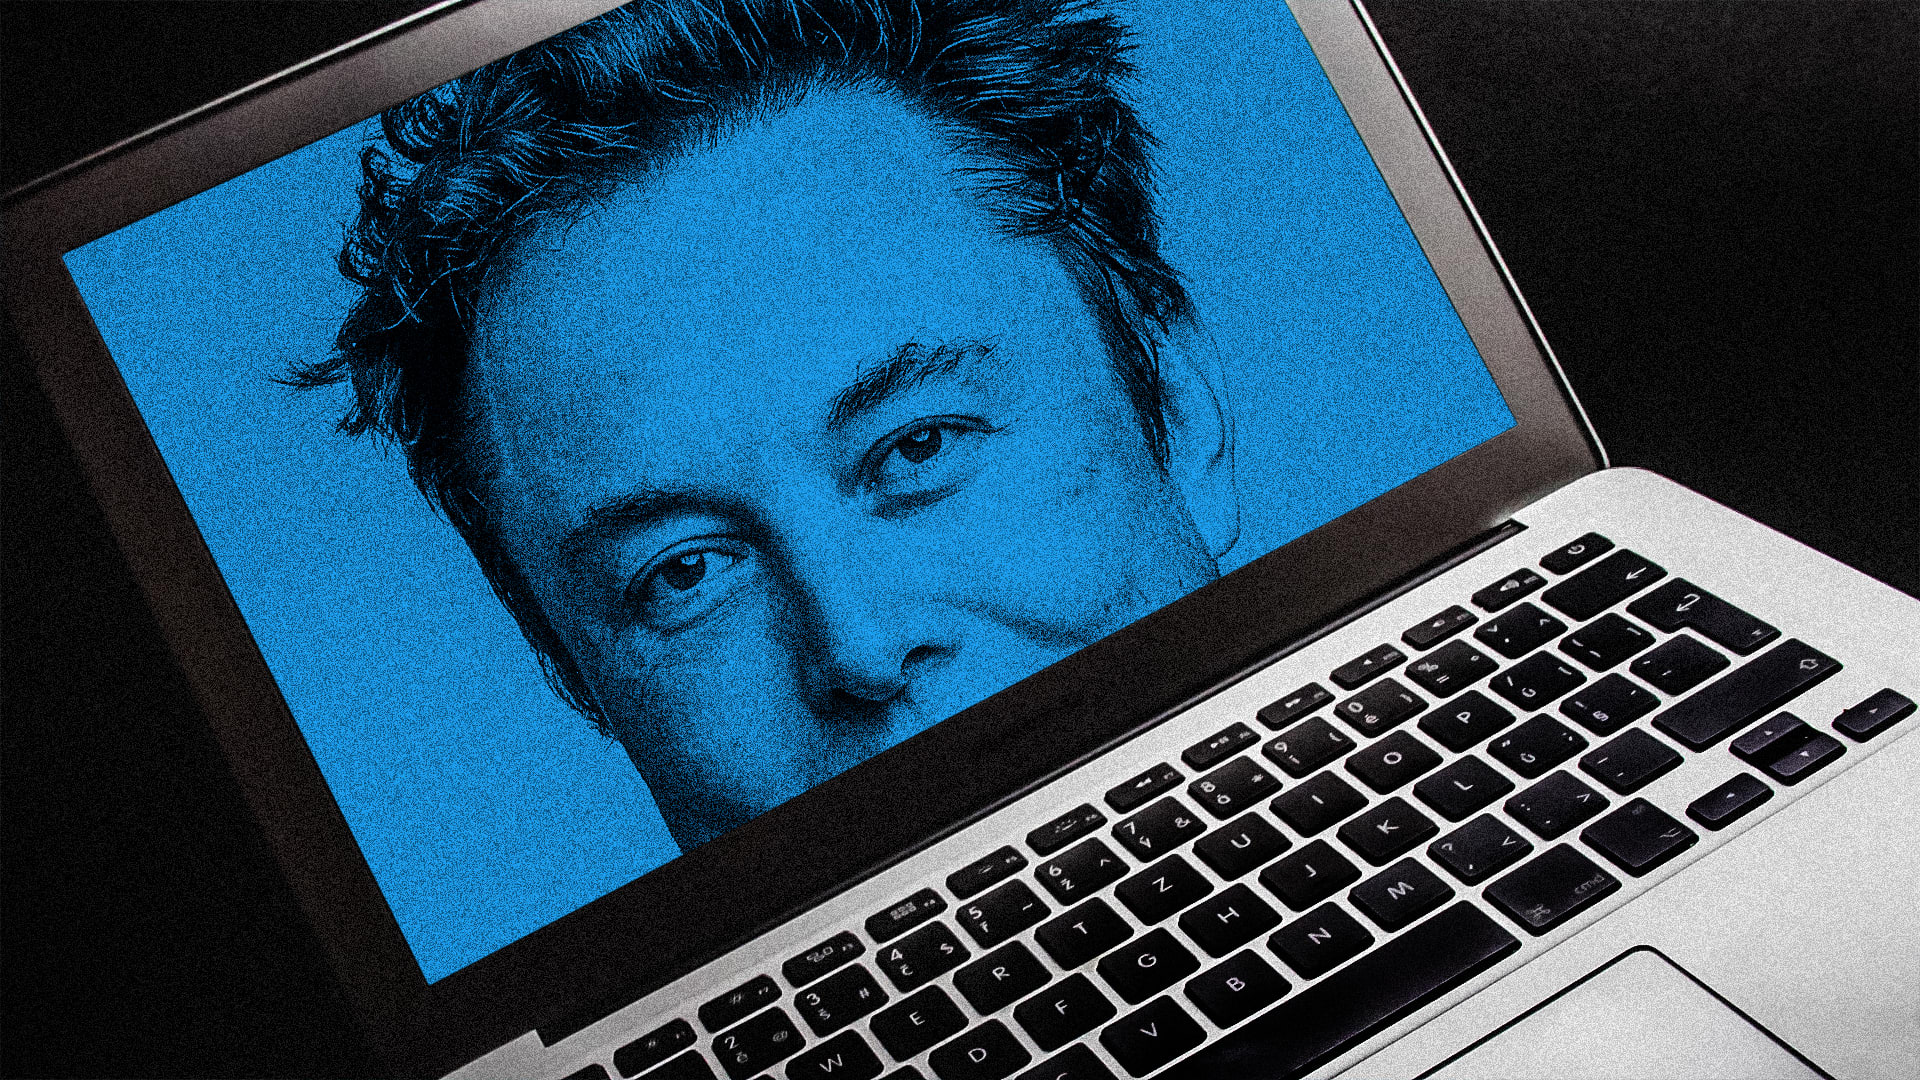 In the latest Twitter drama, Elon Musk comes for Apple